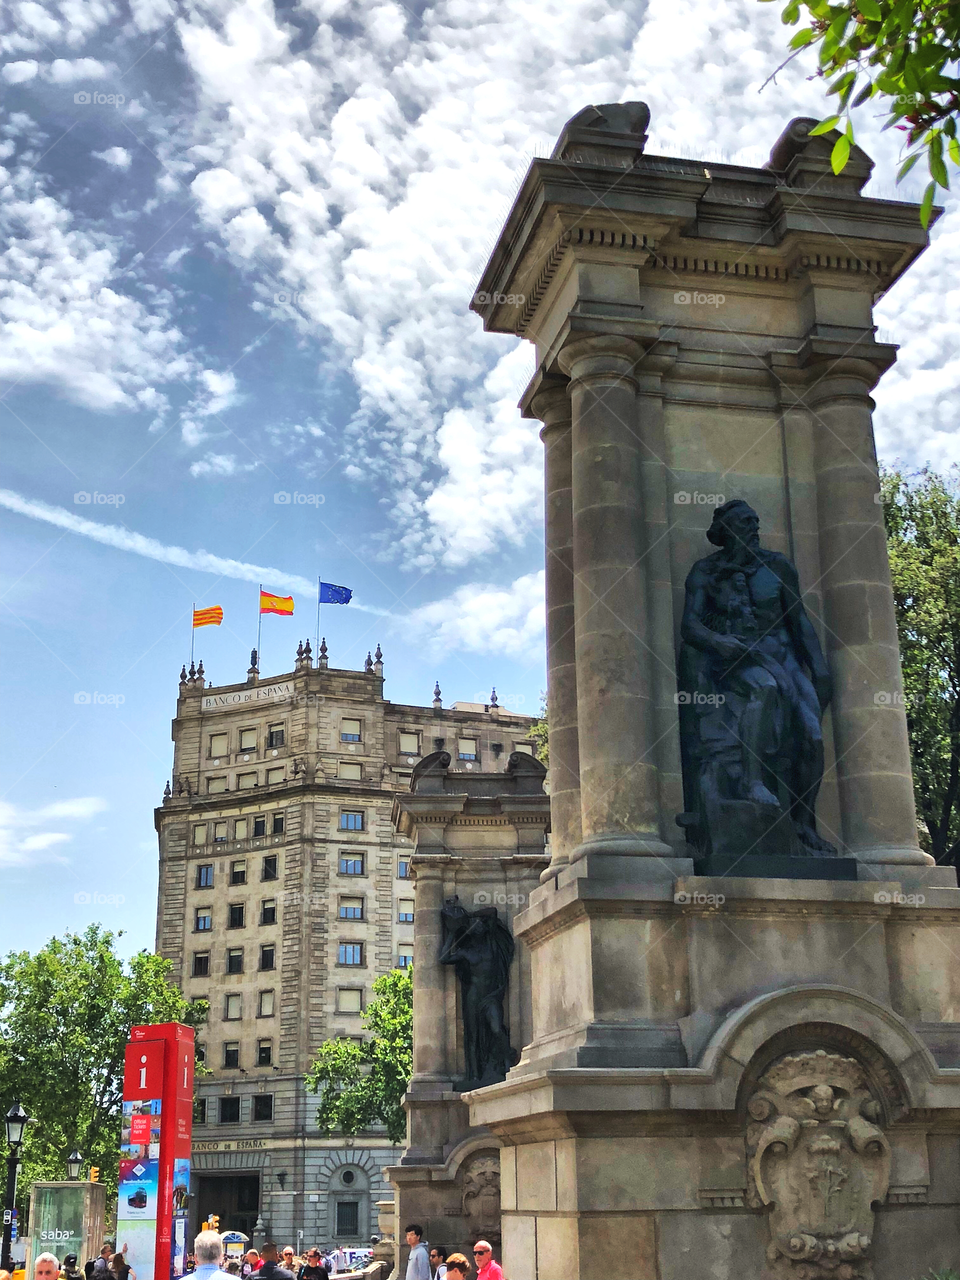 Plaza de Catalunya statues in barcelona with tree flags in the back: Spain, Catalunya and European Union